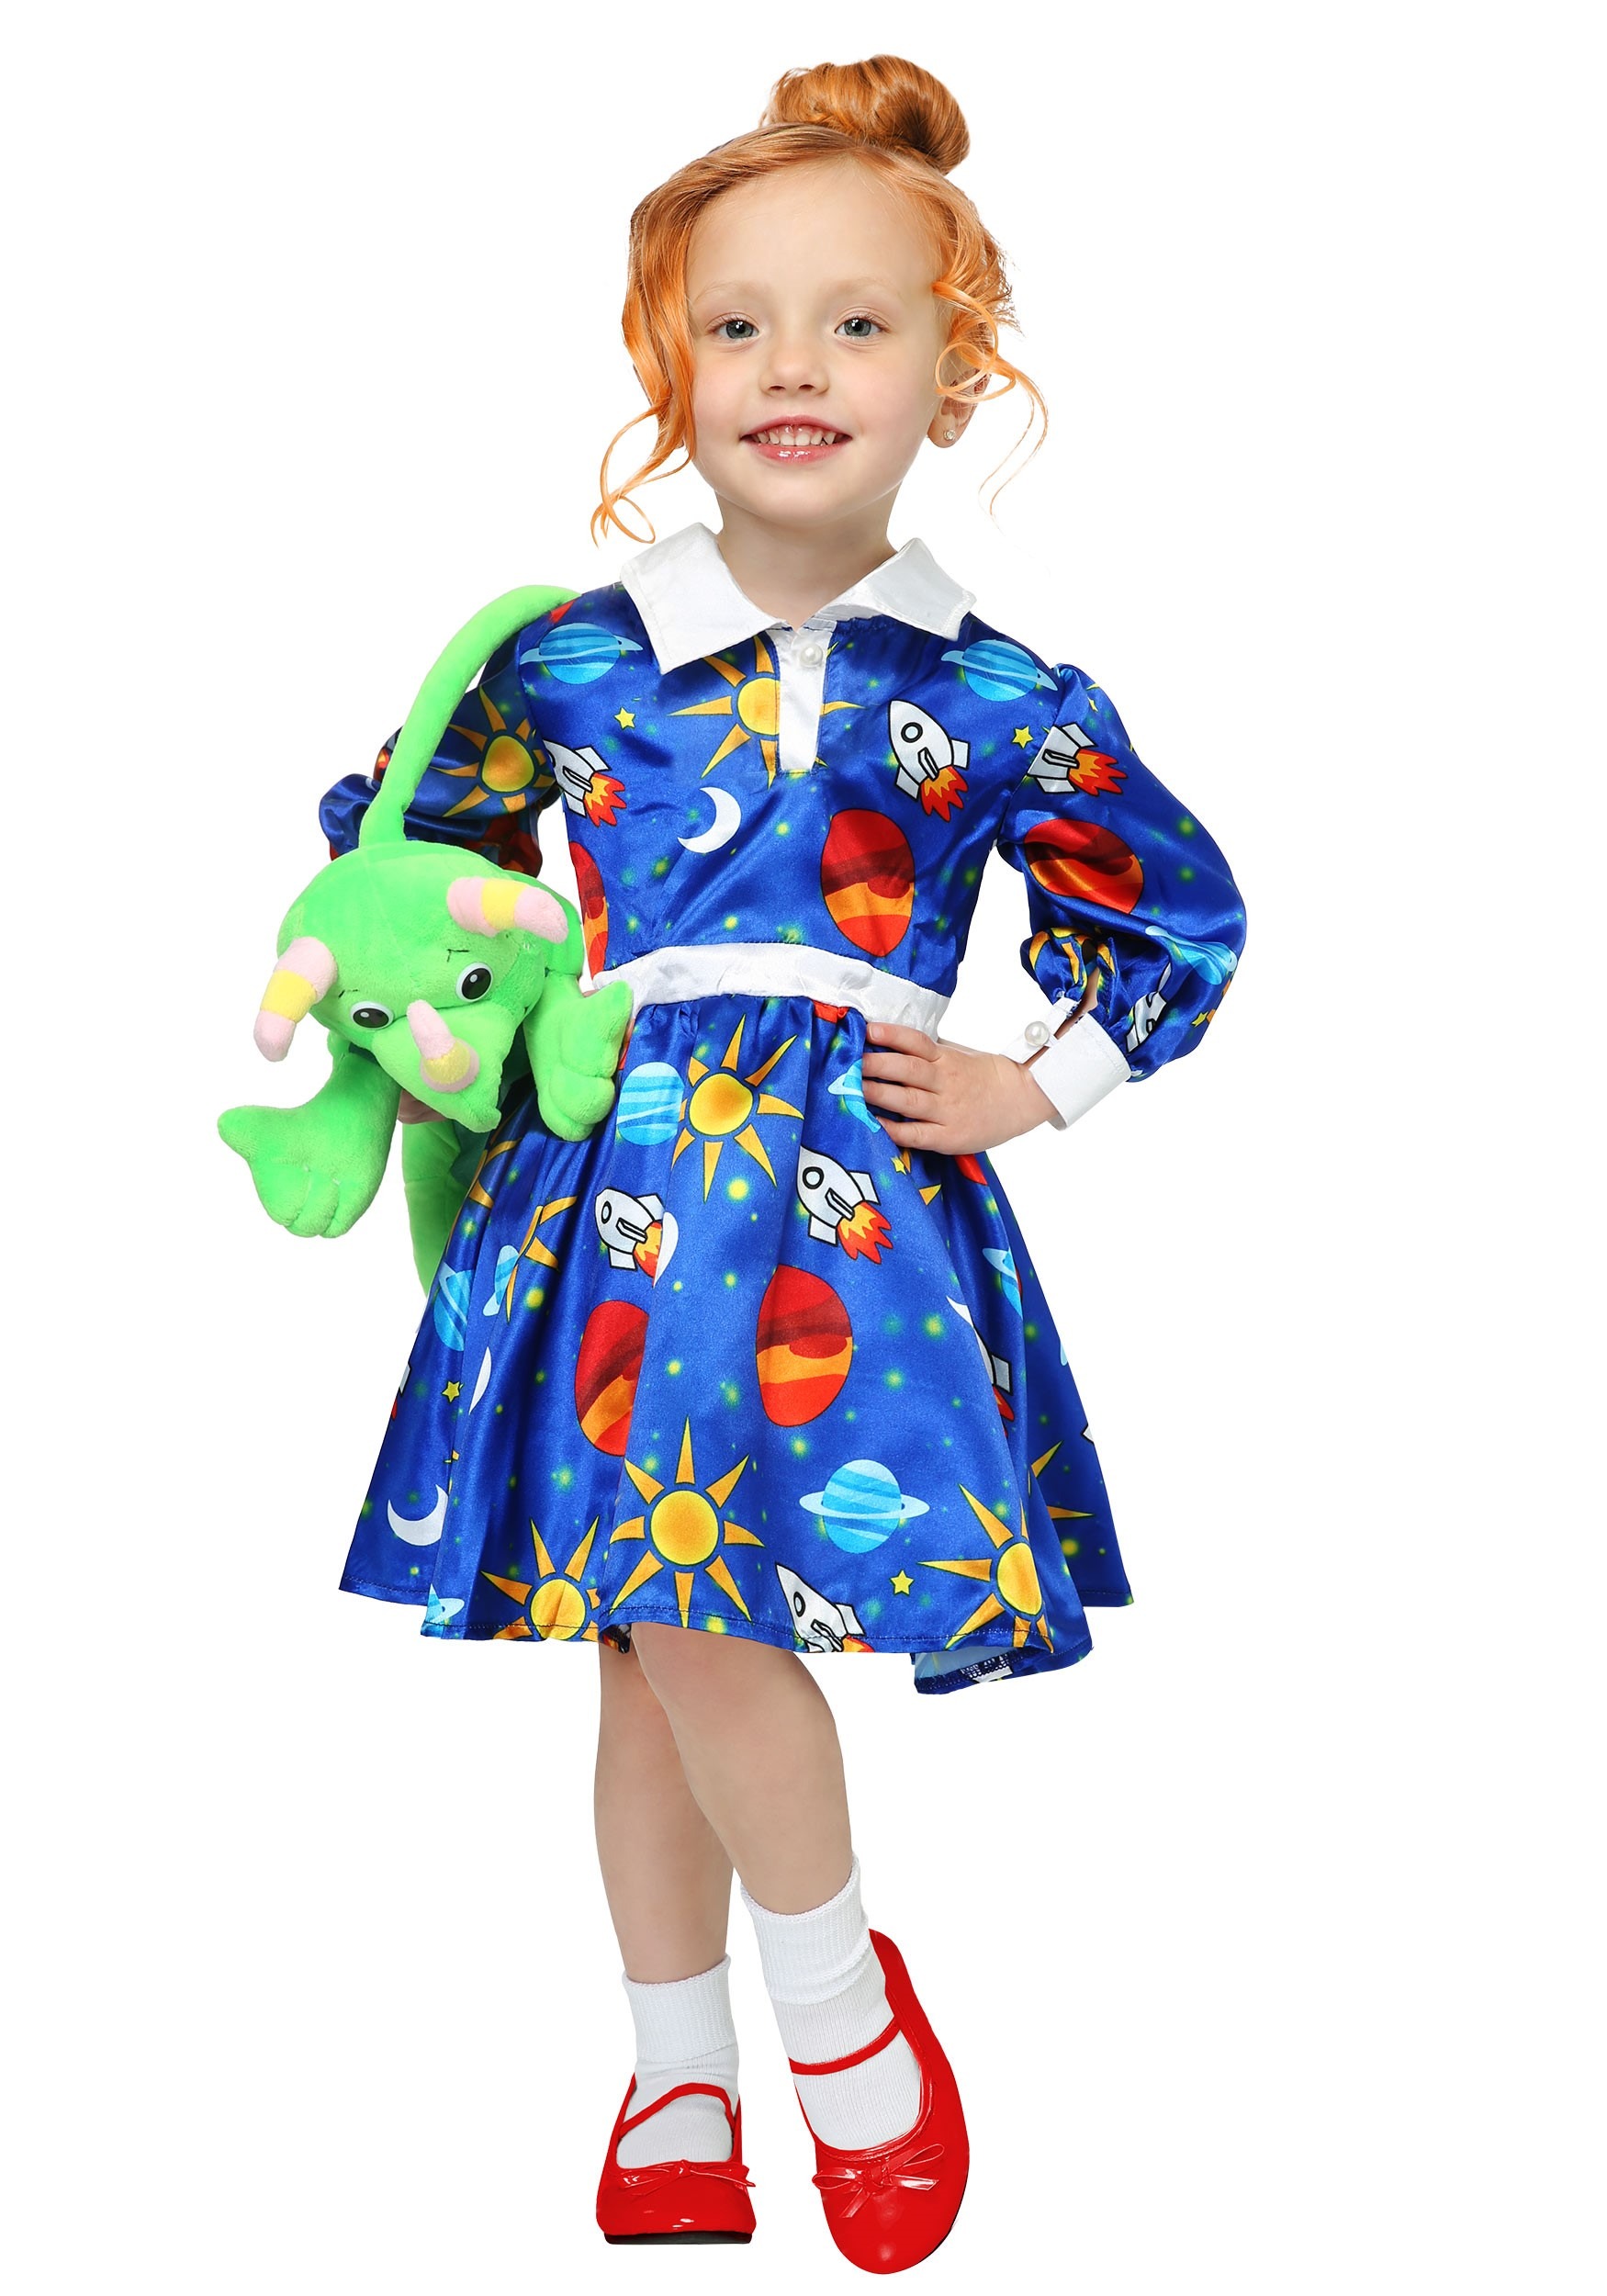 Magic School Bus Ms. Frizzle Costume For Toddlers